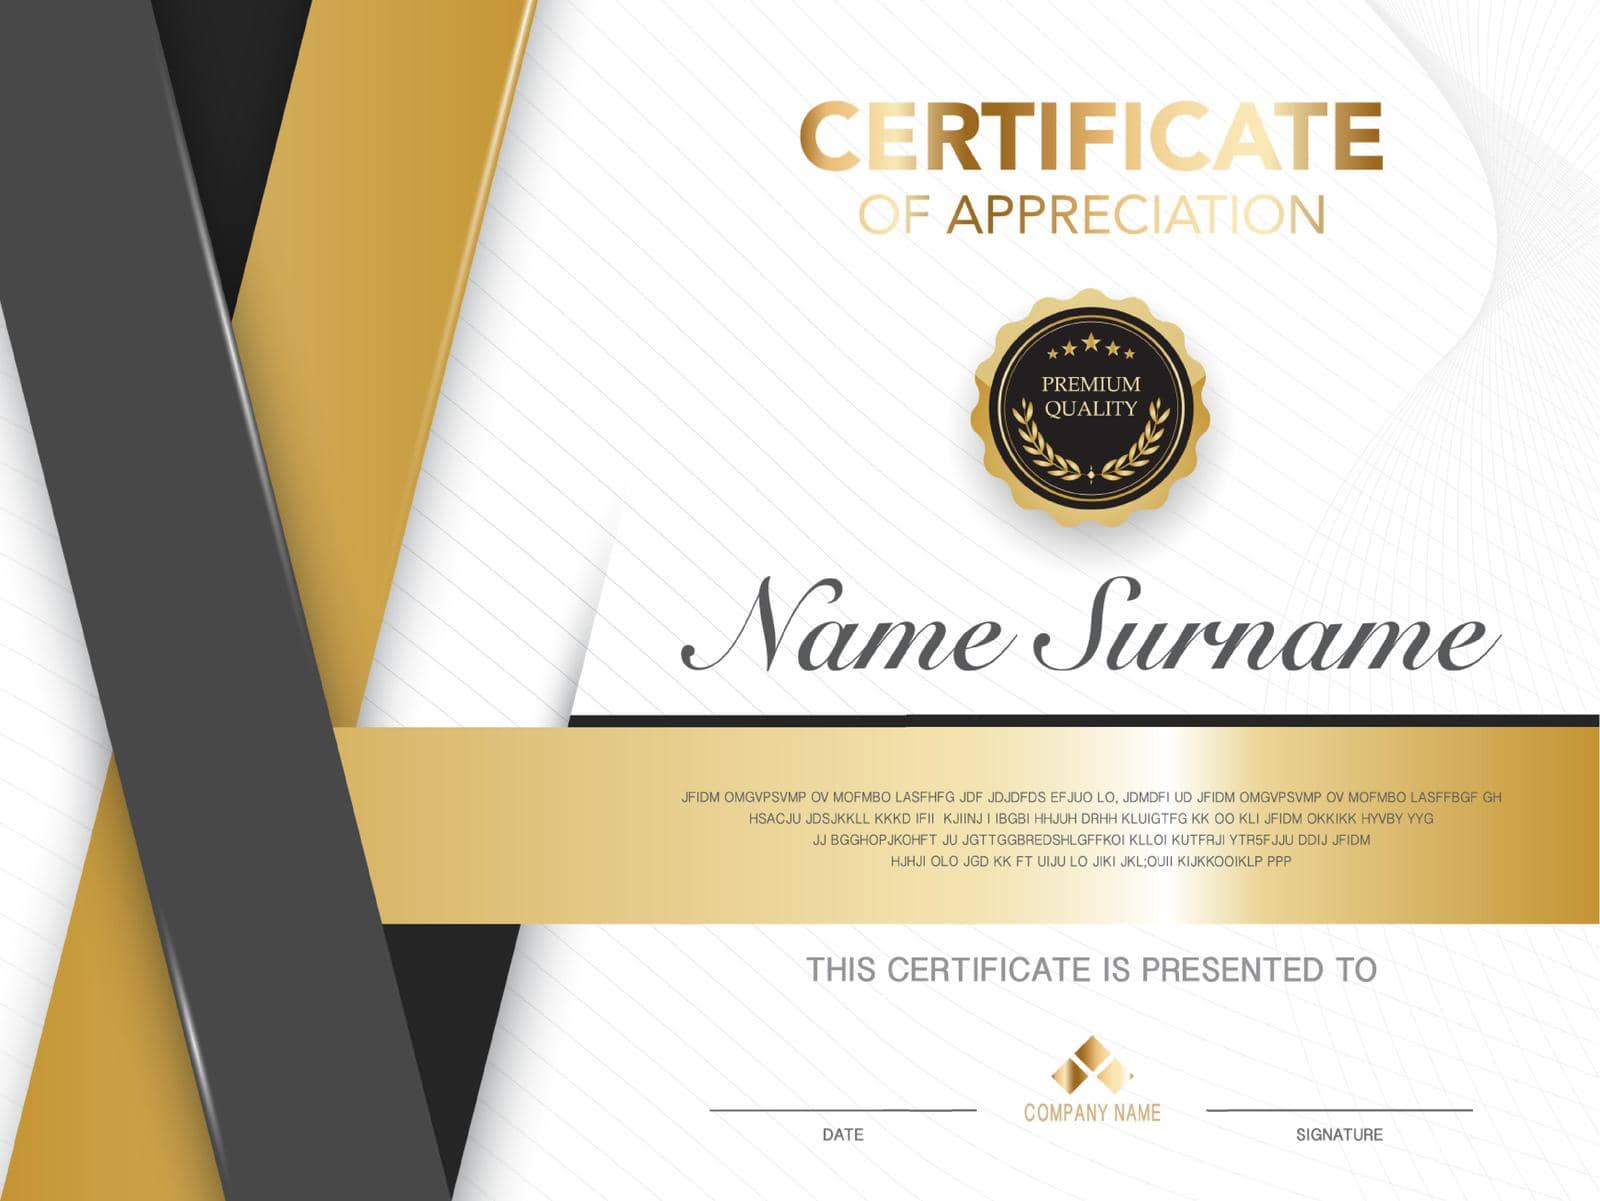 diploma certificate template black and gold color with luxury and modern style vector image, suitable for appreciation.  Vector illustration